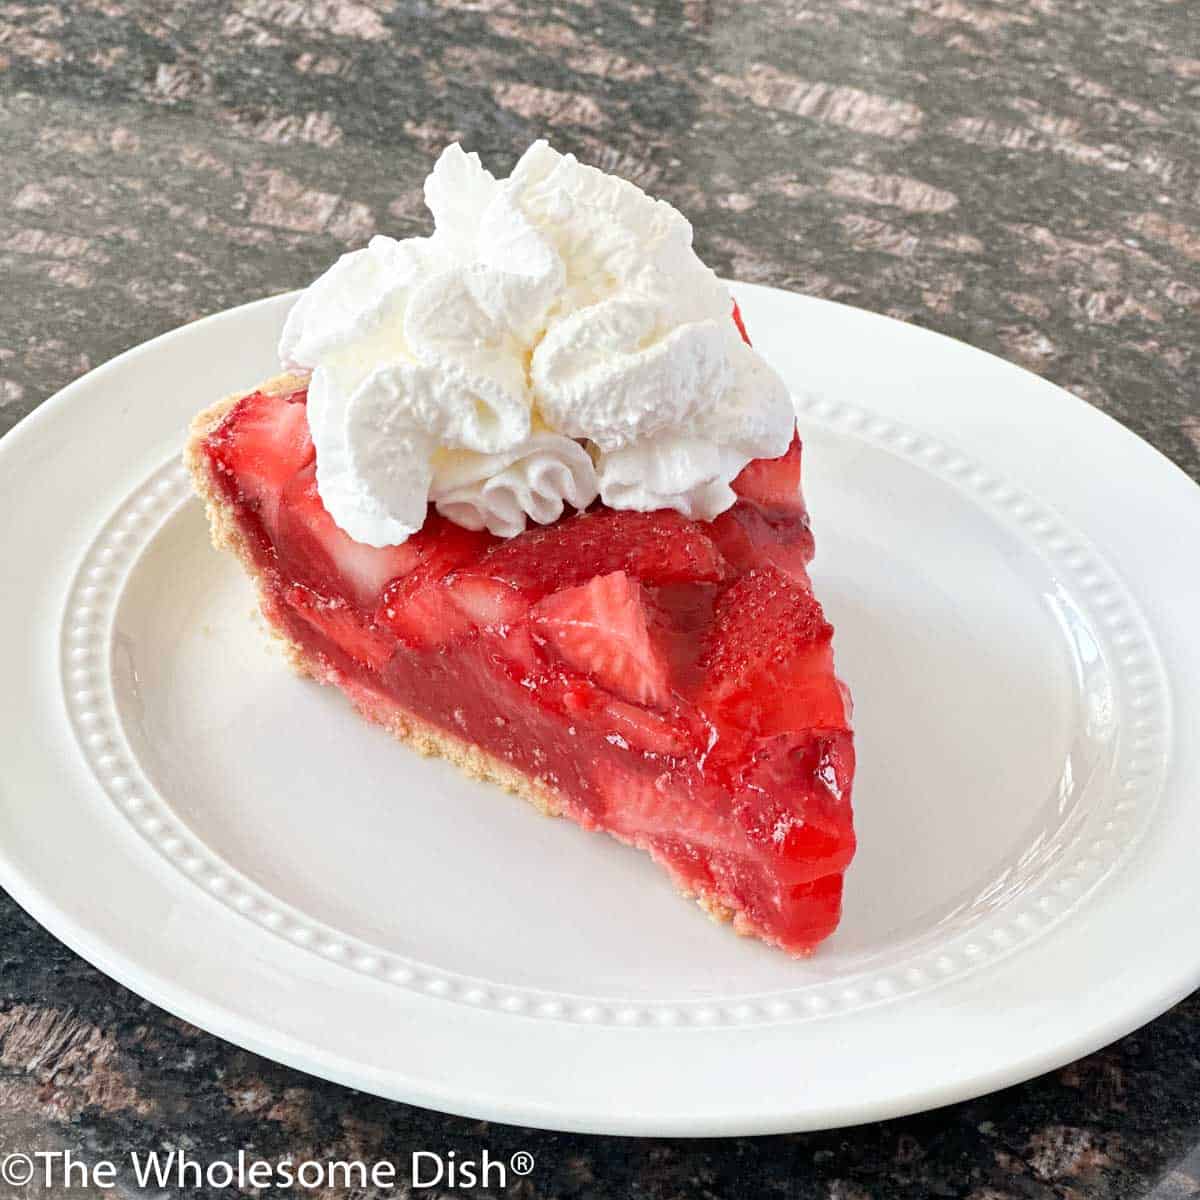 Slice of strawberry jello pie topped with whipped cream on a white plate.